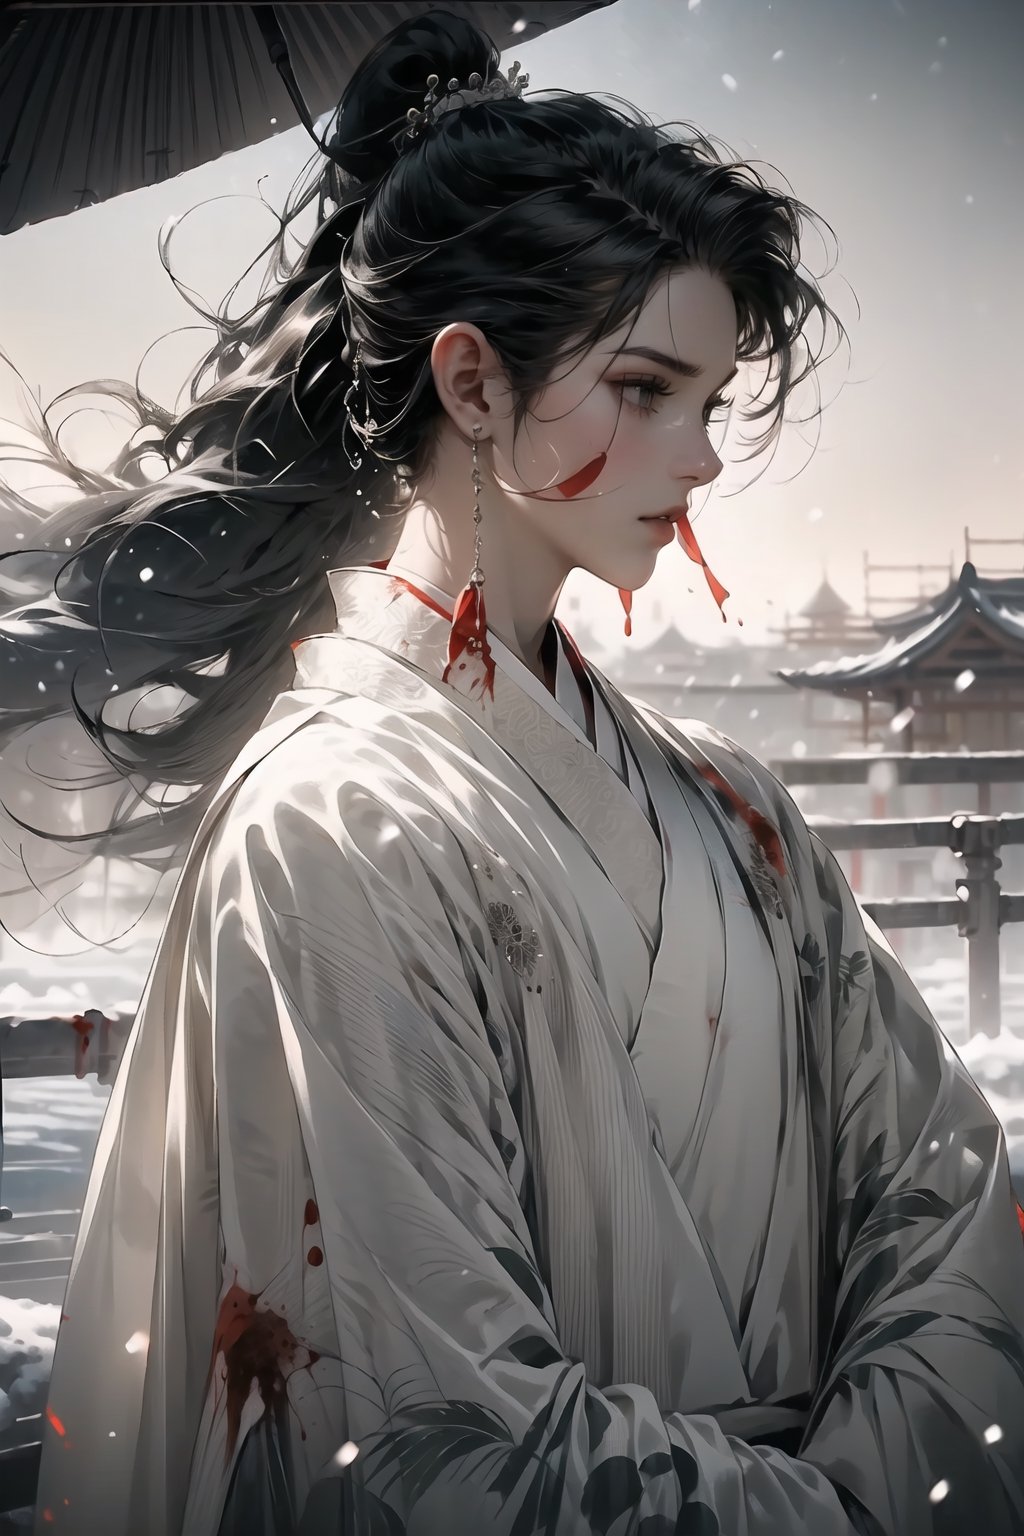 (BLACK_HAIRED_MALE_with_a little
bloody_wounds_on_his_face :1.5),wears white hanfu and the thick white plush shawl, high ponytail,best quality, masterpiece, beautiful and aesthetic, 16K, (HDR:1.4), high contrast, (vibrant color:0.5), (muted colors, dim colors, soothing tones:1.3), Exquisite details and textures, cinematic shot, Cold tone, (Dark and intense:1.2), wide shot, ultra realistic illustration,
(extreamly delicate and beautiful:1.2), 8K, (tmasterpiece, best:1.2), (LONG_BLACK_HAIR_MALE:1.5), (PERFECT SYMMETRICAL BLUE EYES:0), a long_haired masculine male, cool and determined, haggard_gaze, (wears white hanfu:1.2), and intricate detailing, finely eye and detailed face, Perfect eyes, Equal eyes, Fantastic lights and shadows、finely detail,Depth of field,,cumulus,wind,insanely Snowing day,very long hair,Chinese ink painting